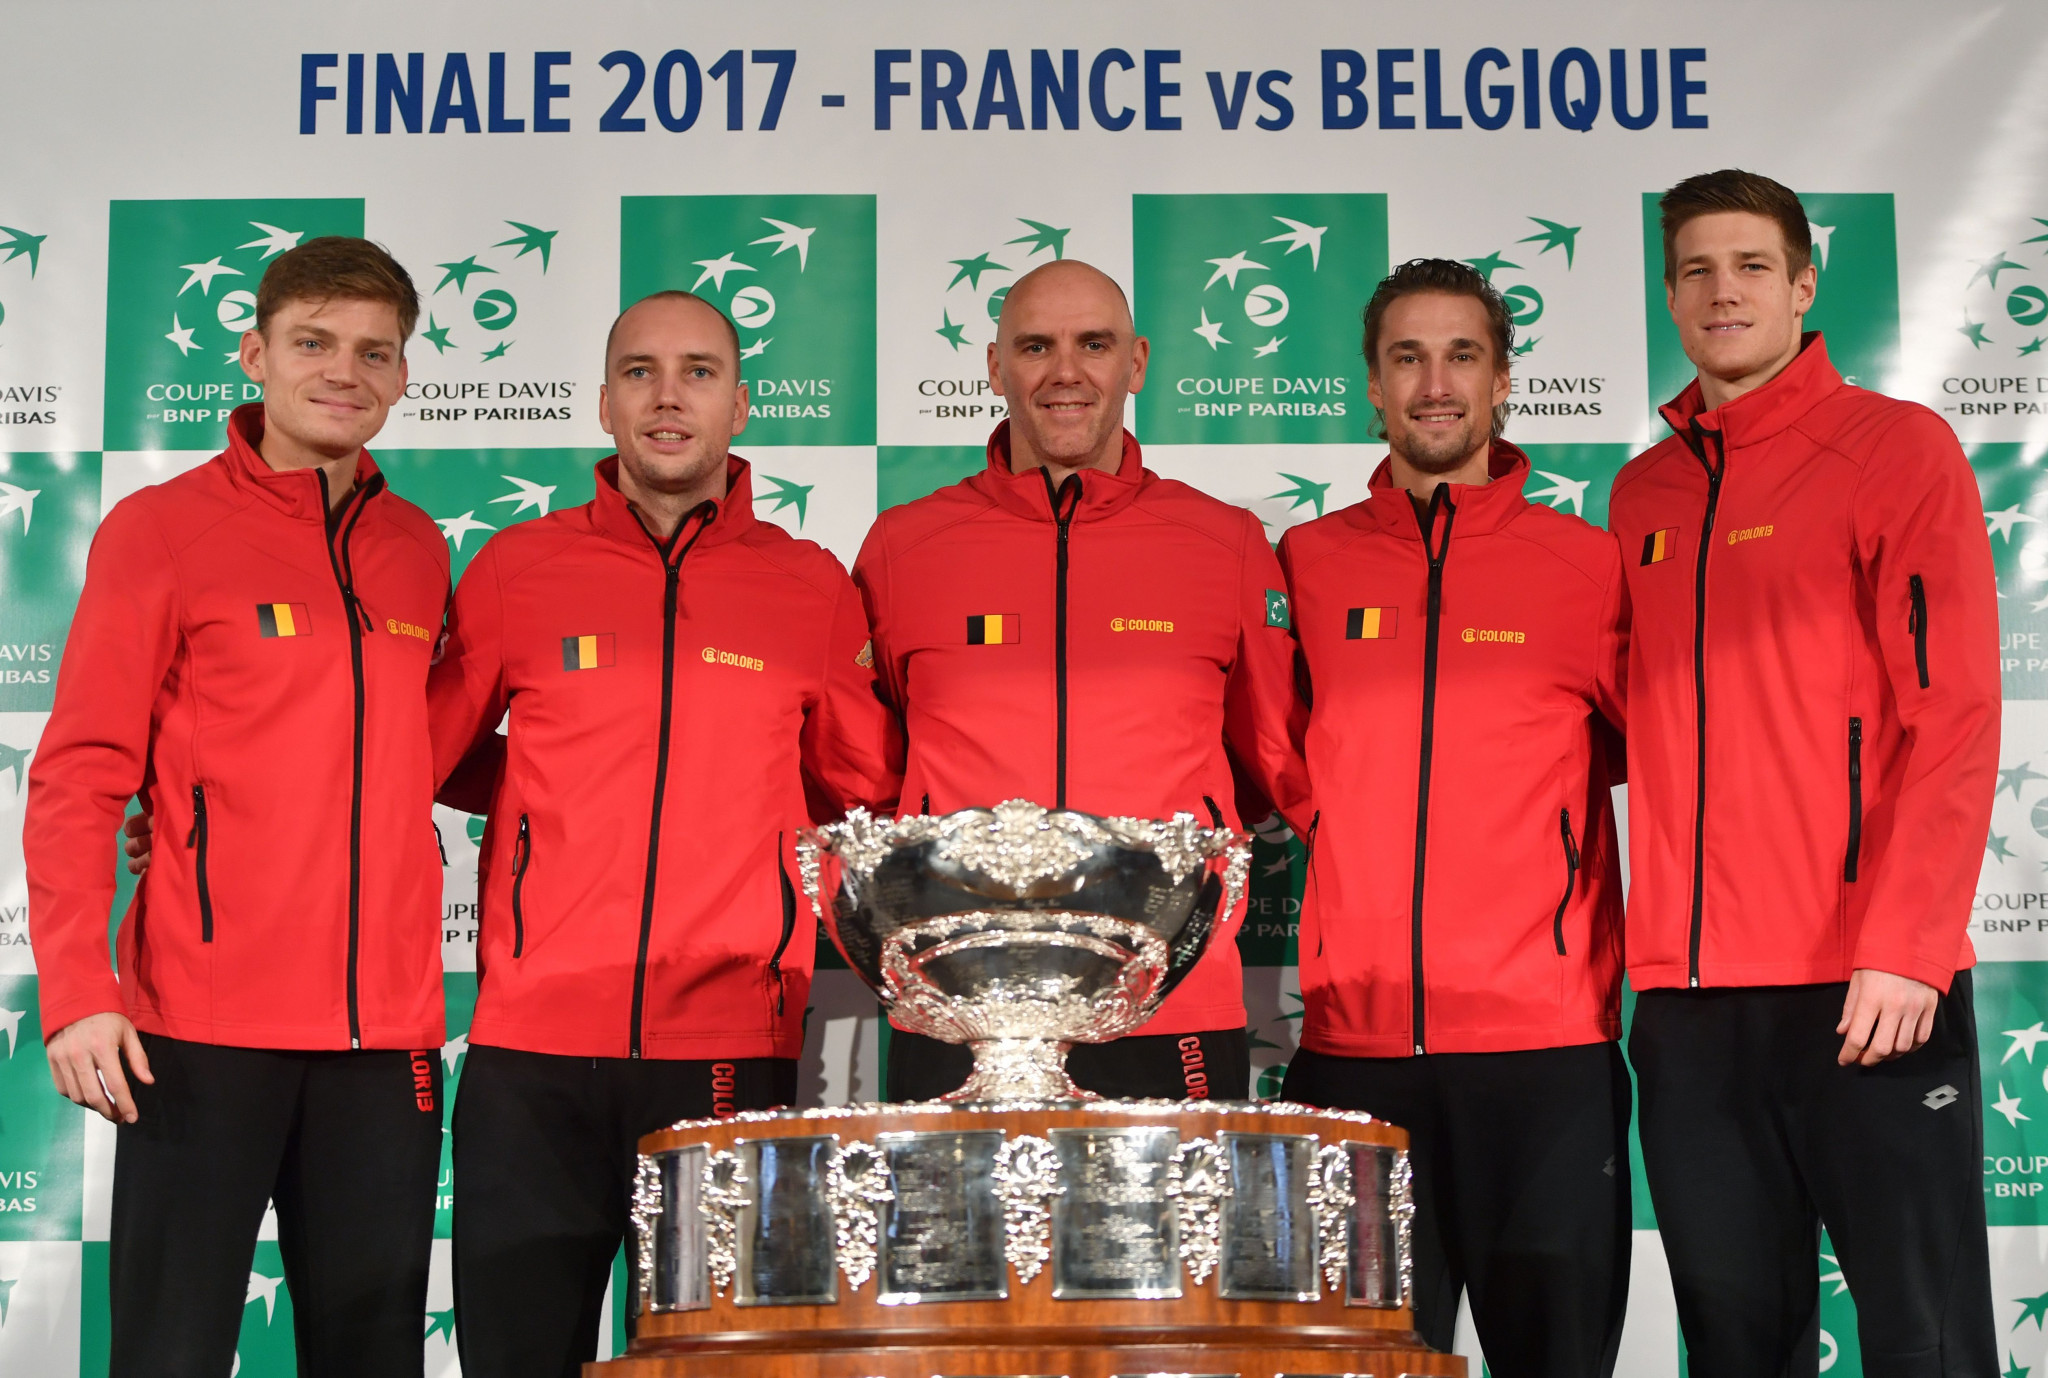 Belgium's captain Johan Van Herck (C) poses with his players (LtoR) David Goffin, Steve Darcis, Ruben Bemelmans and Arthur de Greef with the trophy during the team presentation in Villeneuve-d'Ascq on November 23, 2017, ahead of the Davis Cup World Group final between France and Belgium ©Getty Images